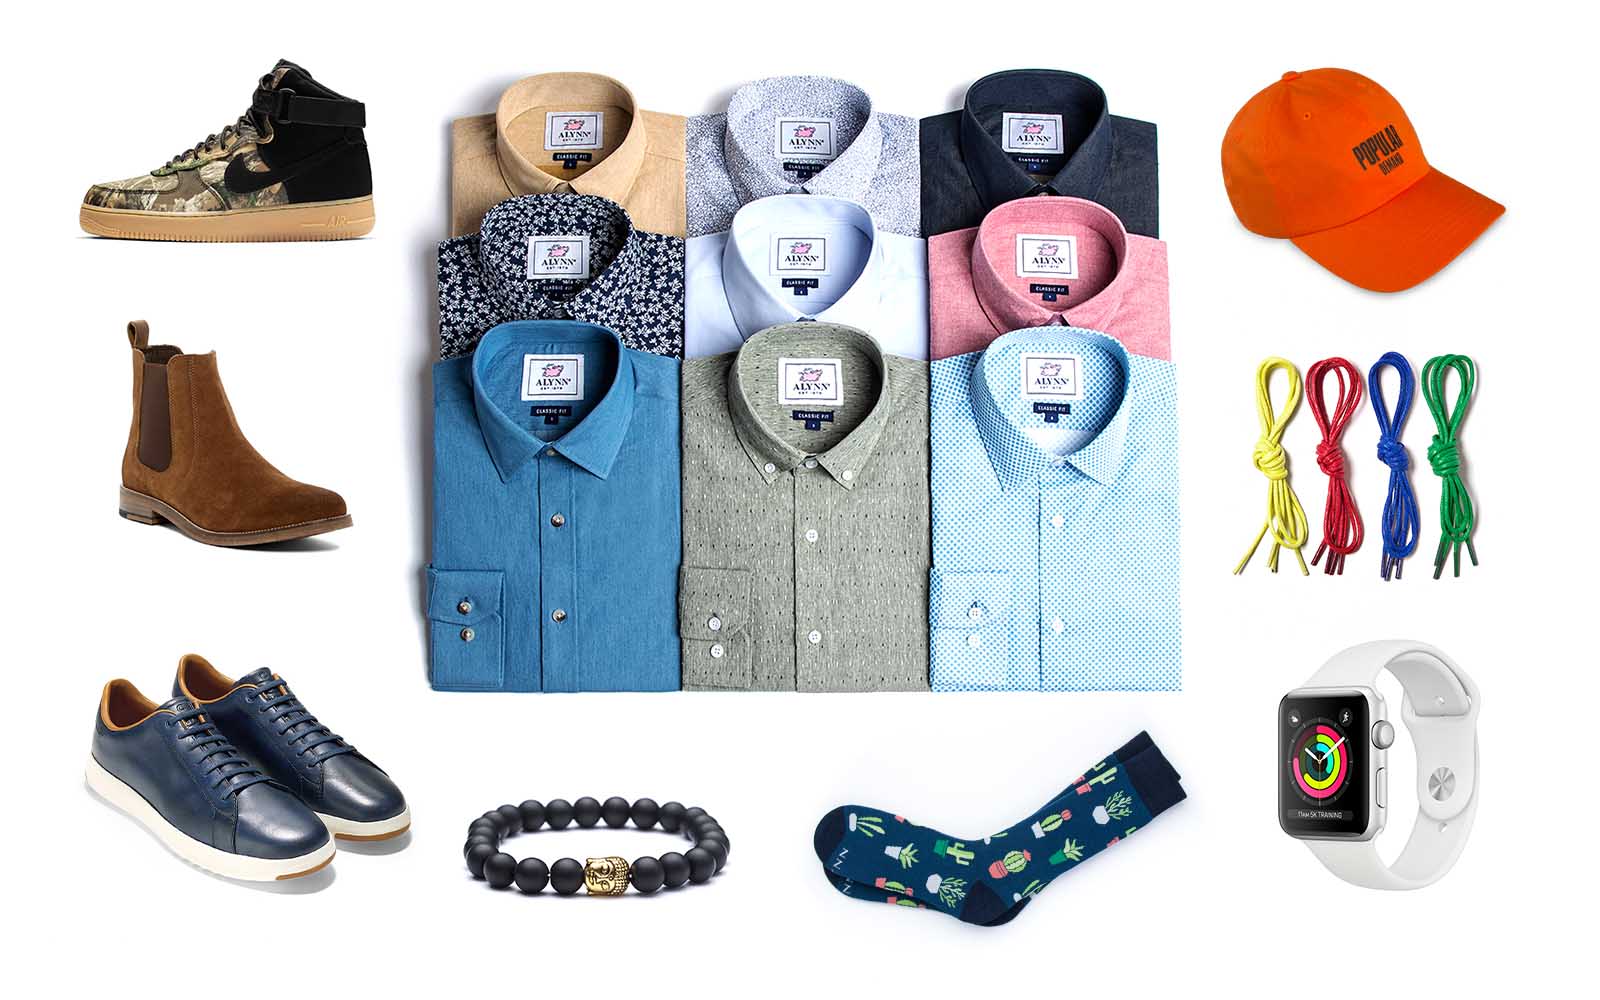 21 Hipster Style Outfits for Men - How to Dress as Hipster?  Preppy mens  fashion, Hipster style outfits, Hipster fashion